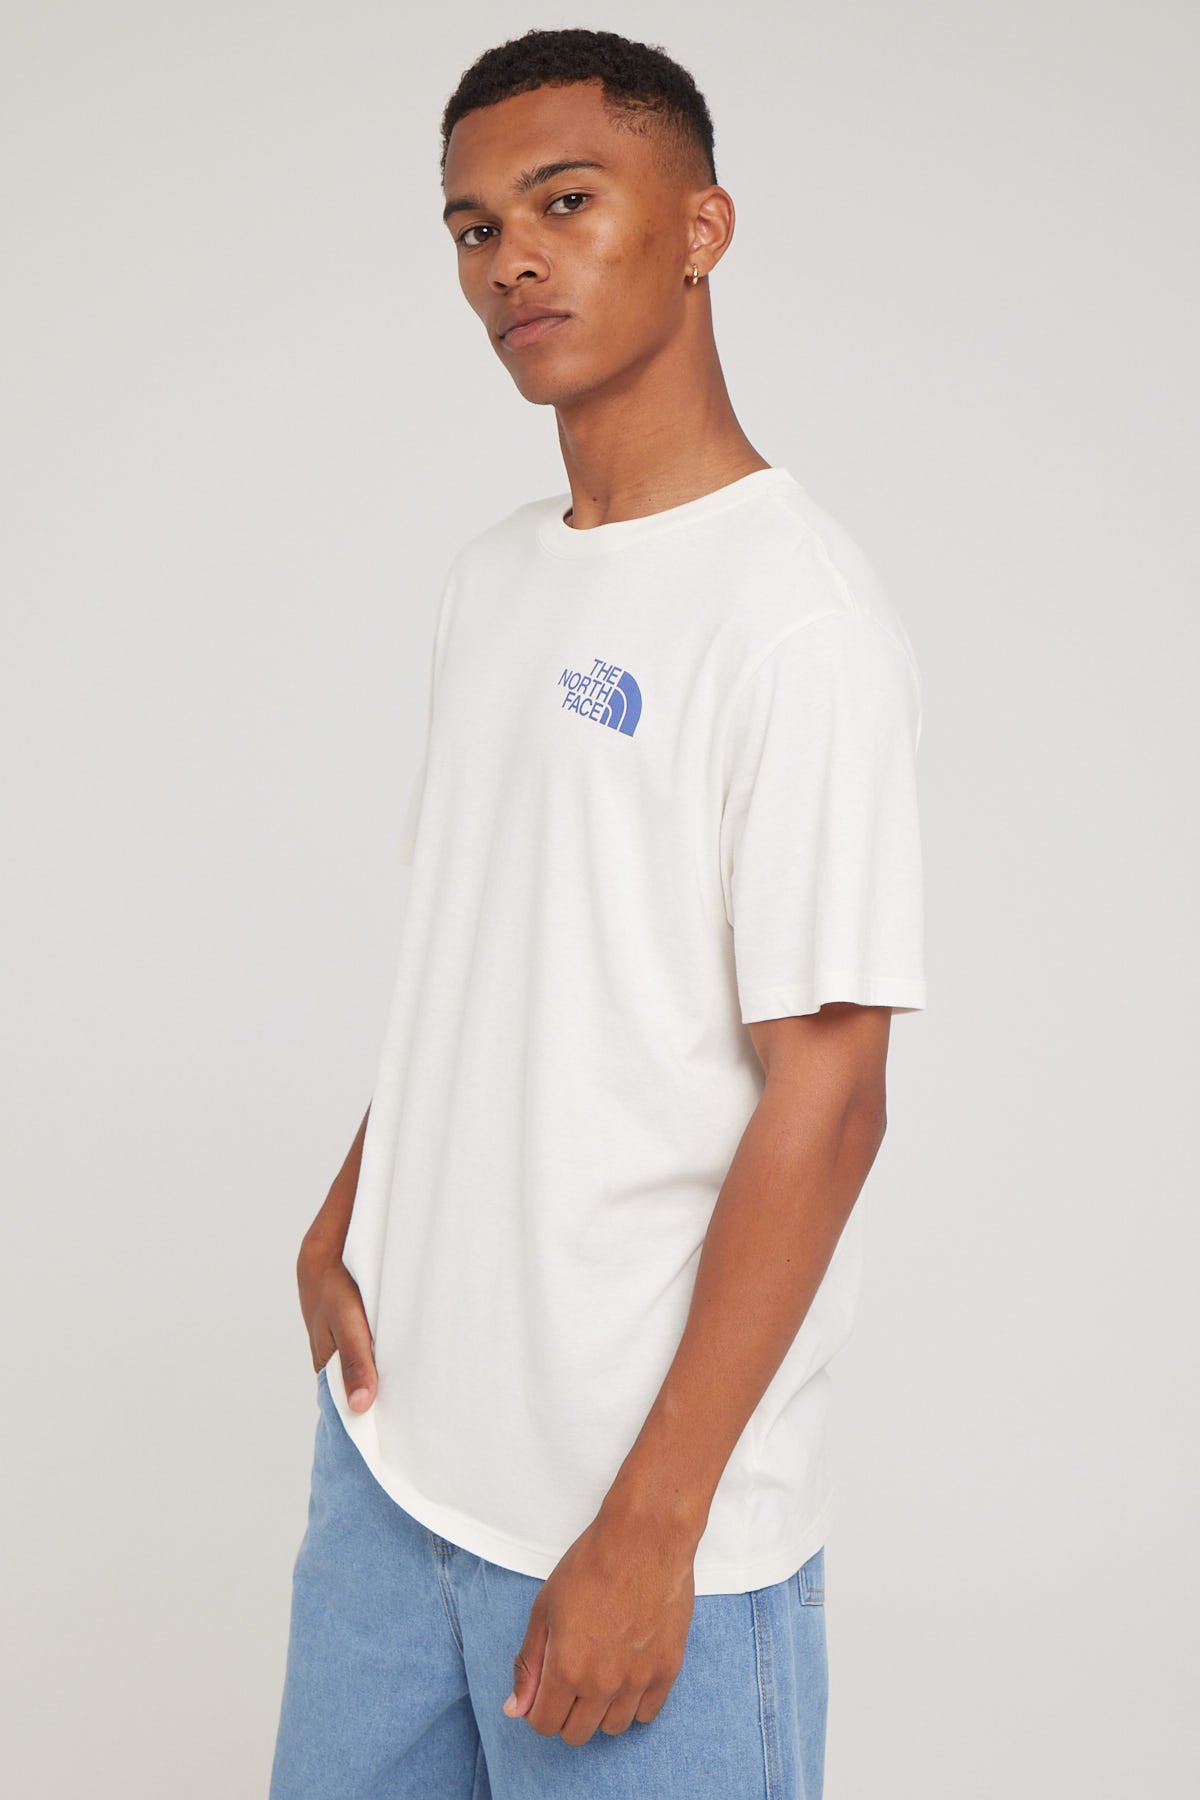 The North Face Men's S/S Places We Love Tee Gardenia White/Cave Blue